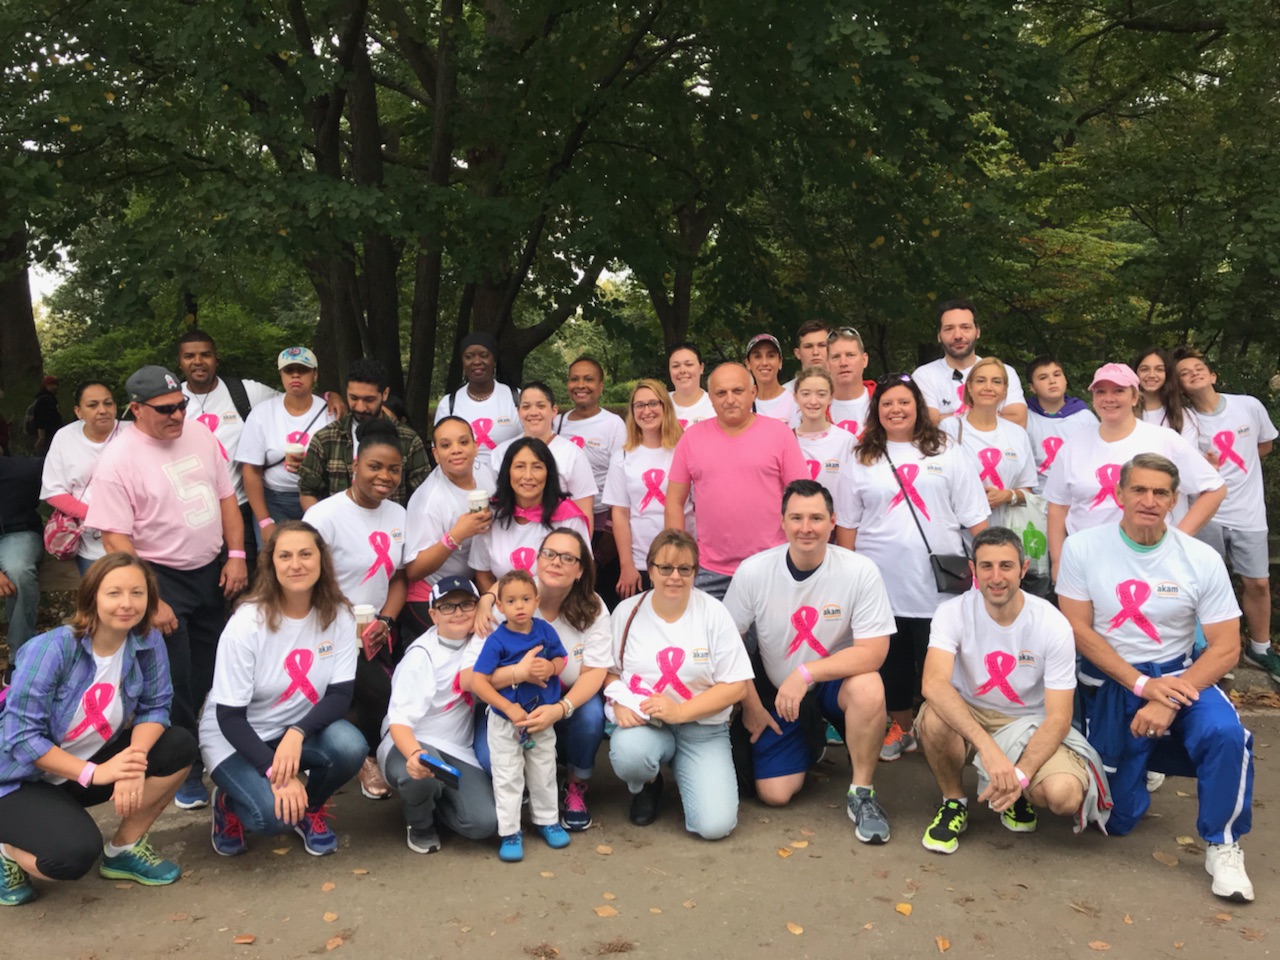 AKAM at the Walk Against Breast Cancer